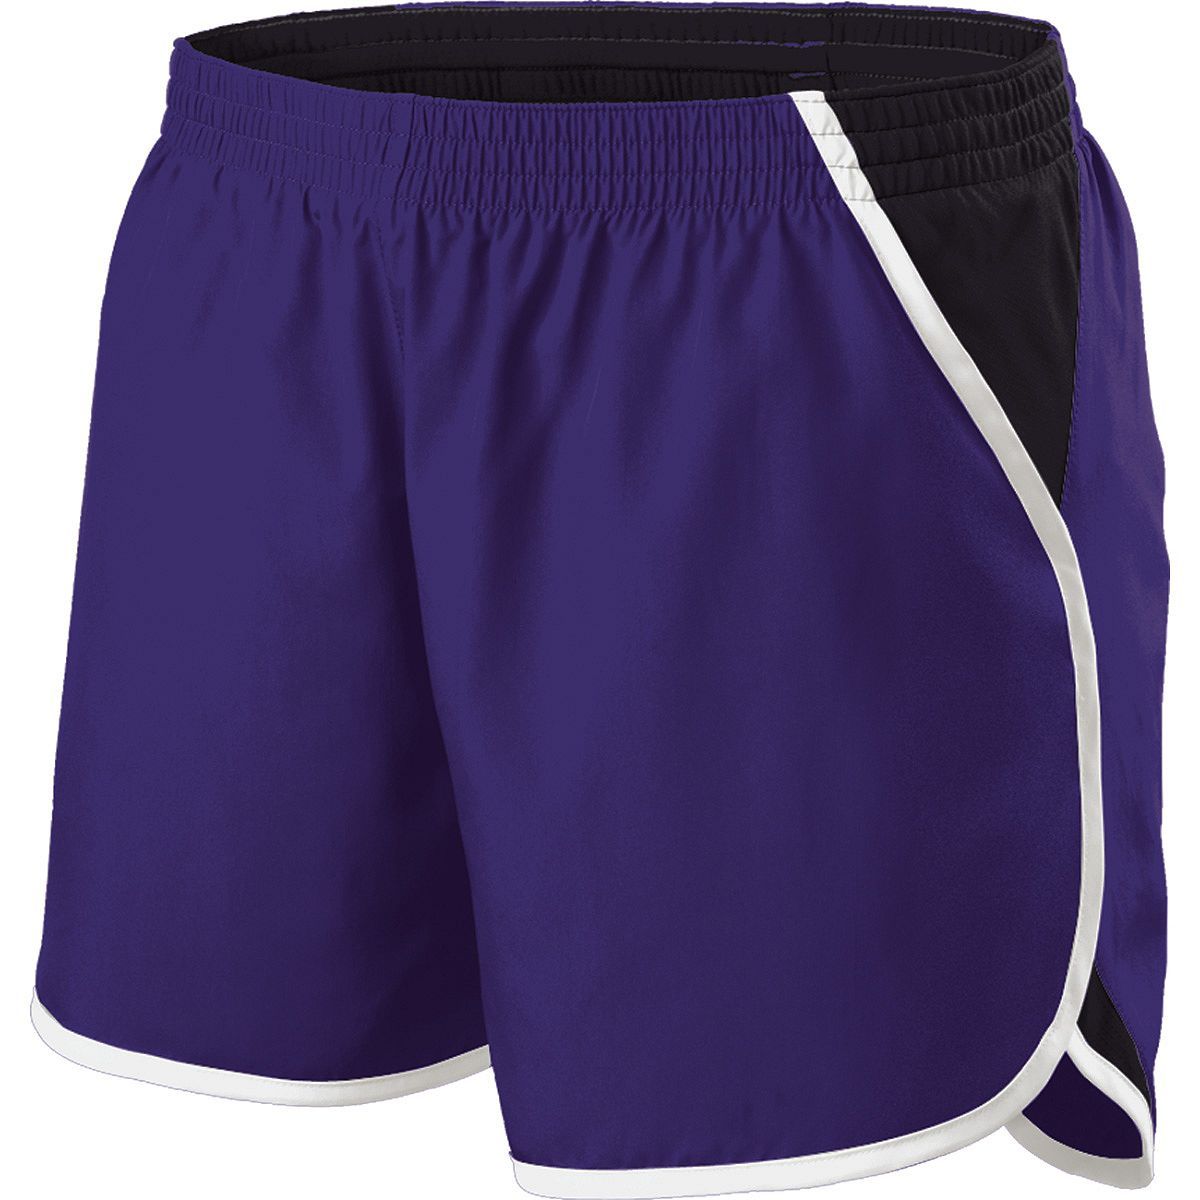 Holloway Energize Shorts in Purple/Black/White  -Part of the Ladies, Ladies-Shorts, Holloway product lines at KanaleyCreations.com